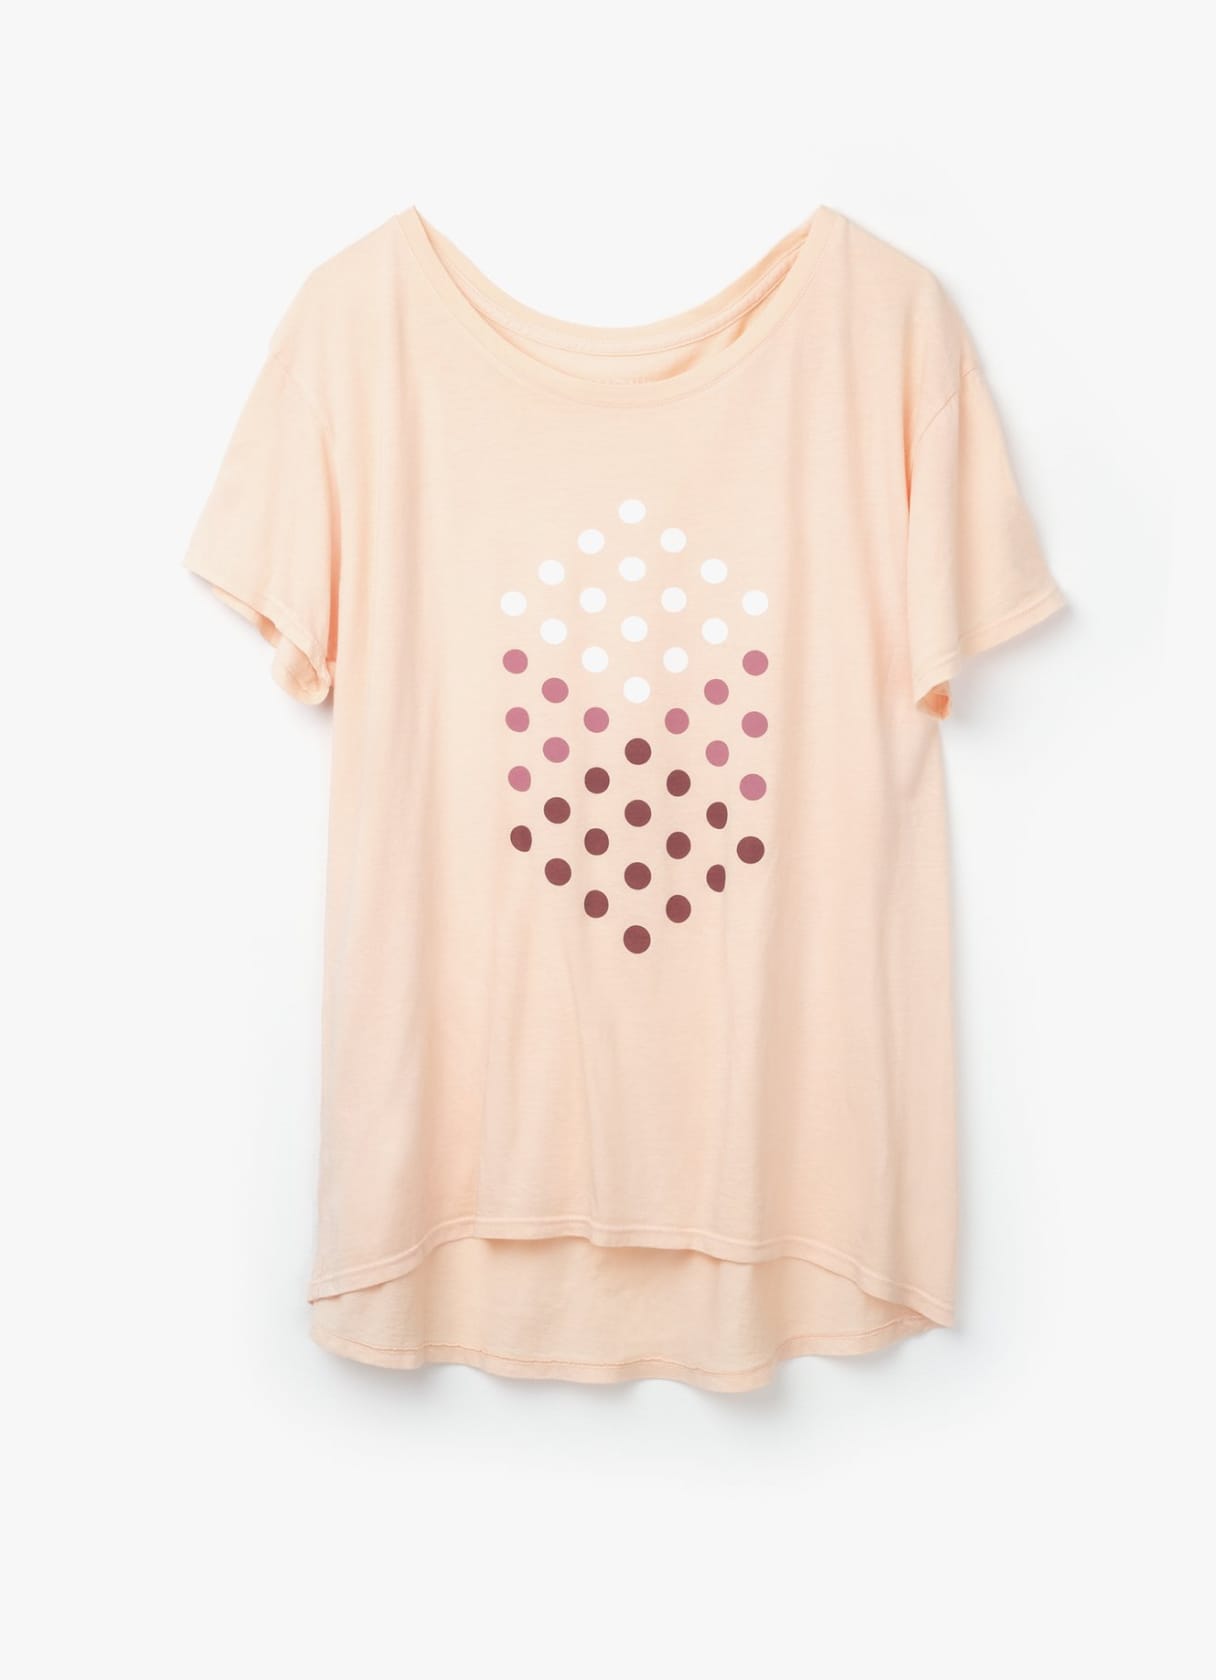 Front of men's Artwork Tee in peach with white and brown dots forming an isometric cube.